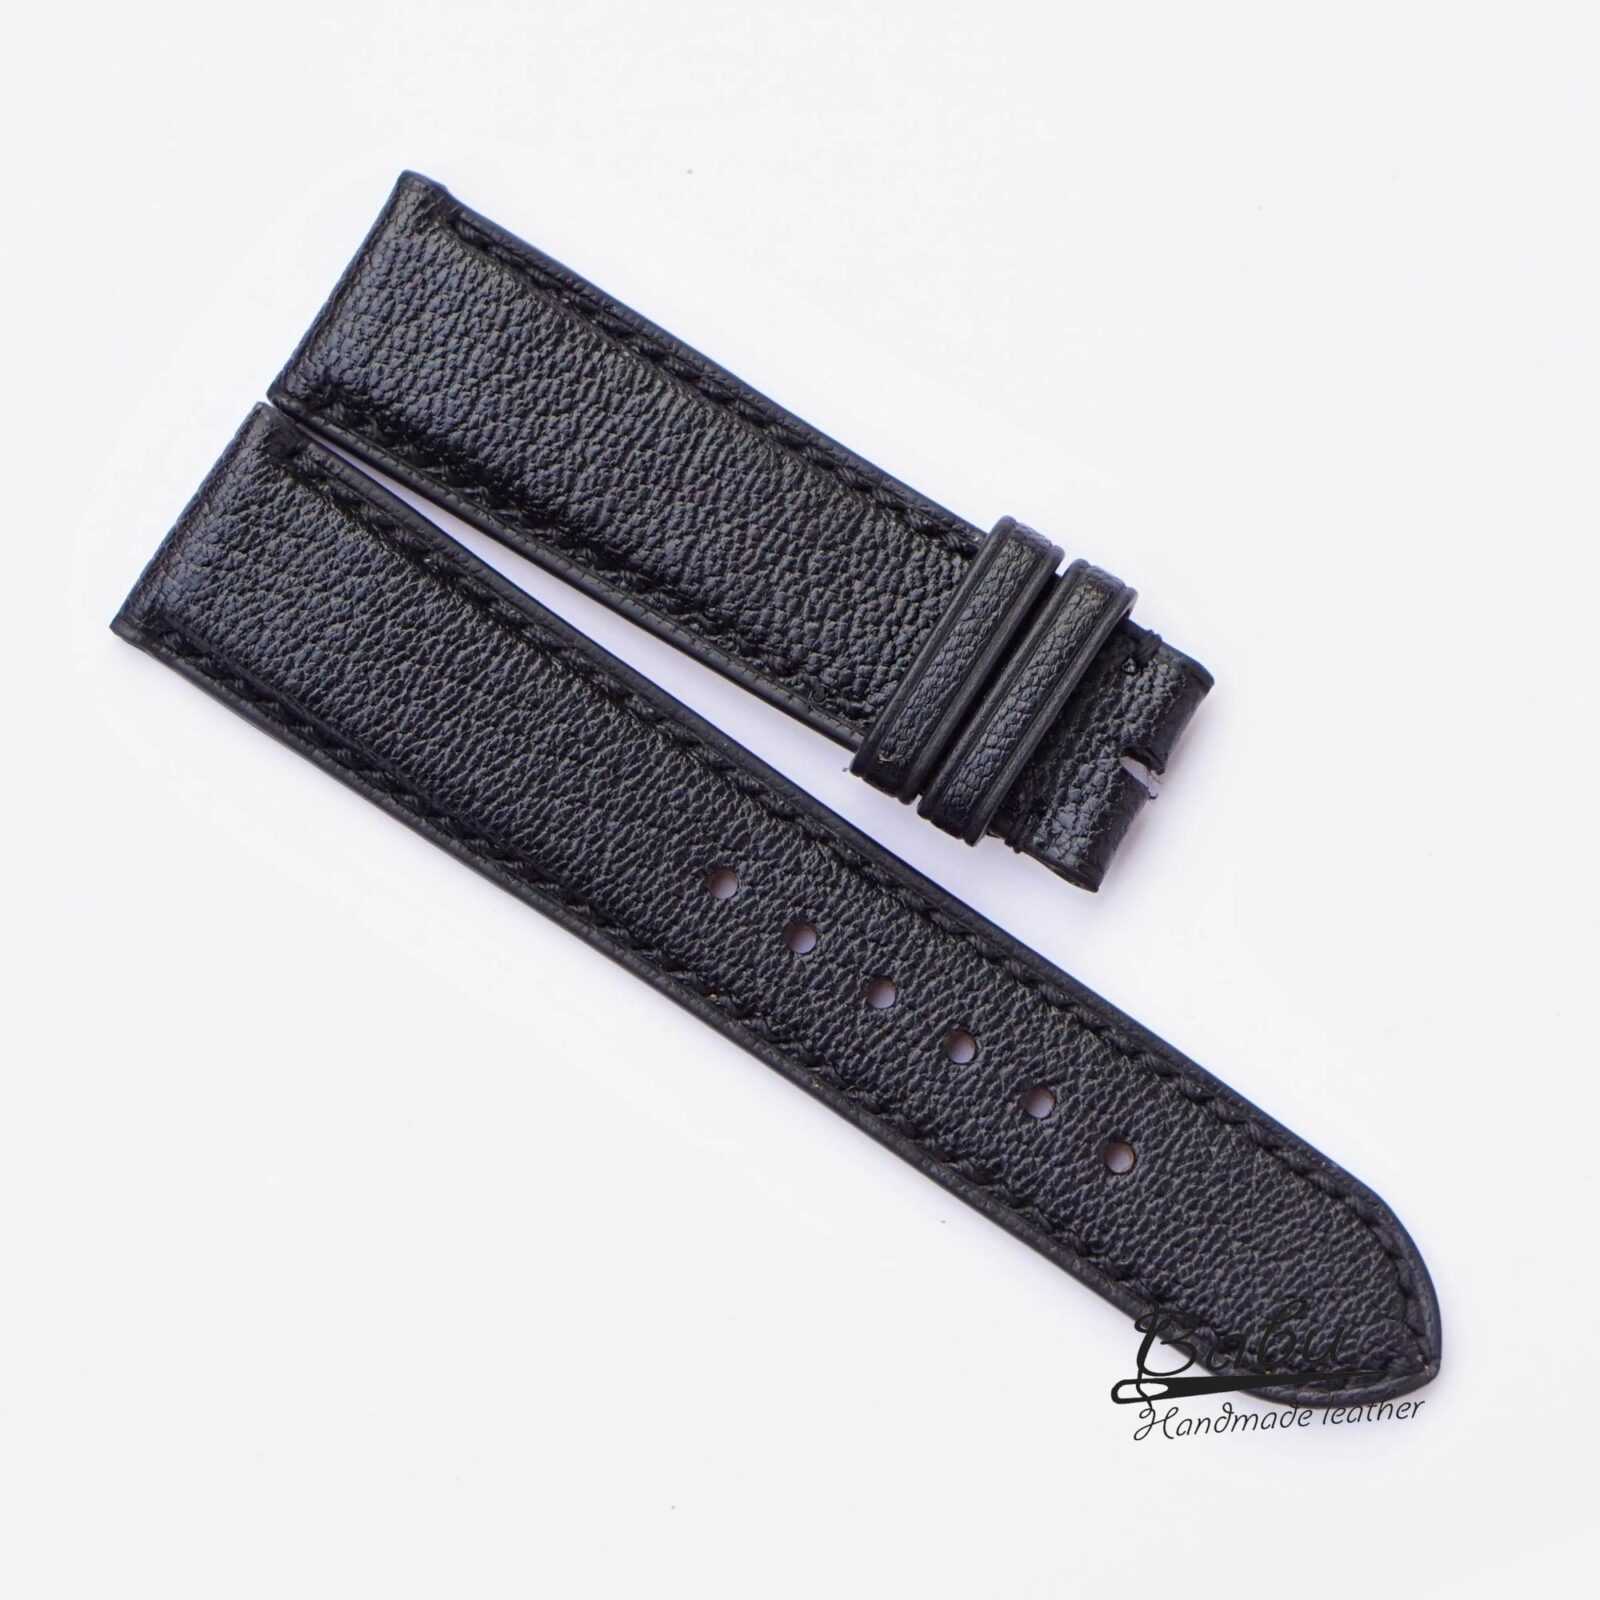 Handmade Alran Sully leather strap, Black leather watch band SW209